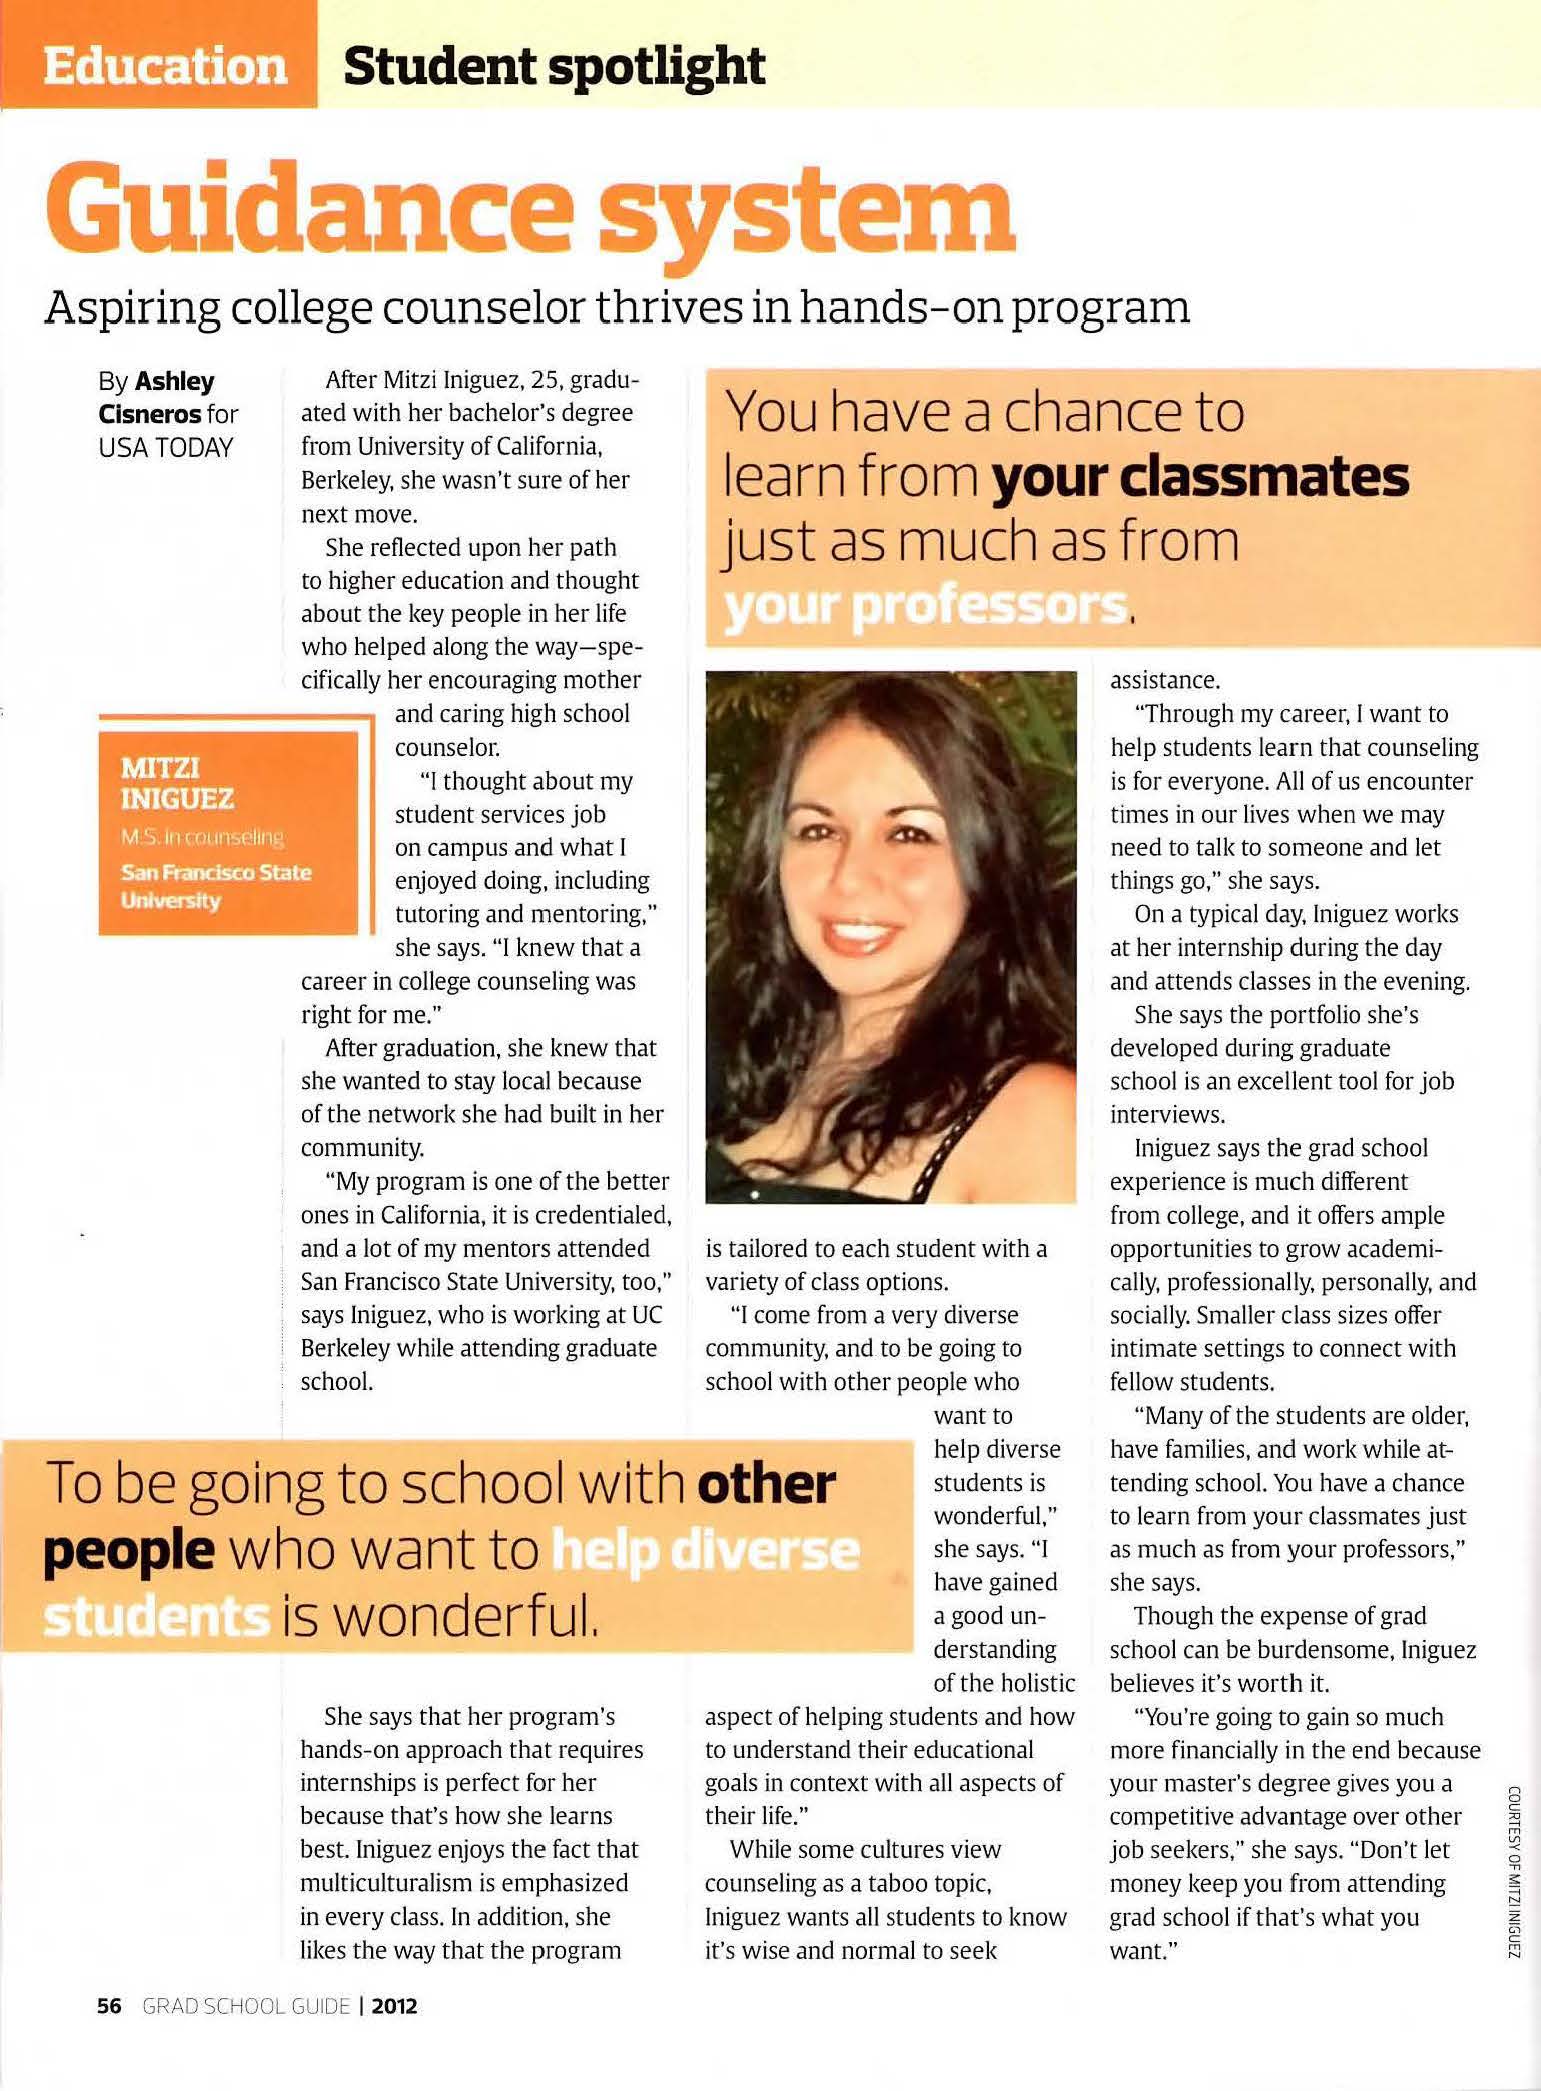 USA Today - Aspiring college counselor thrives in hands-on program by Ashley Cisneros Mejia